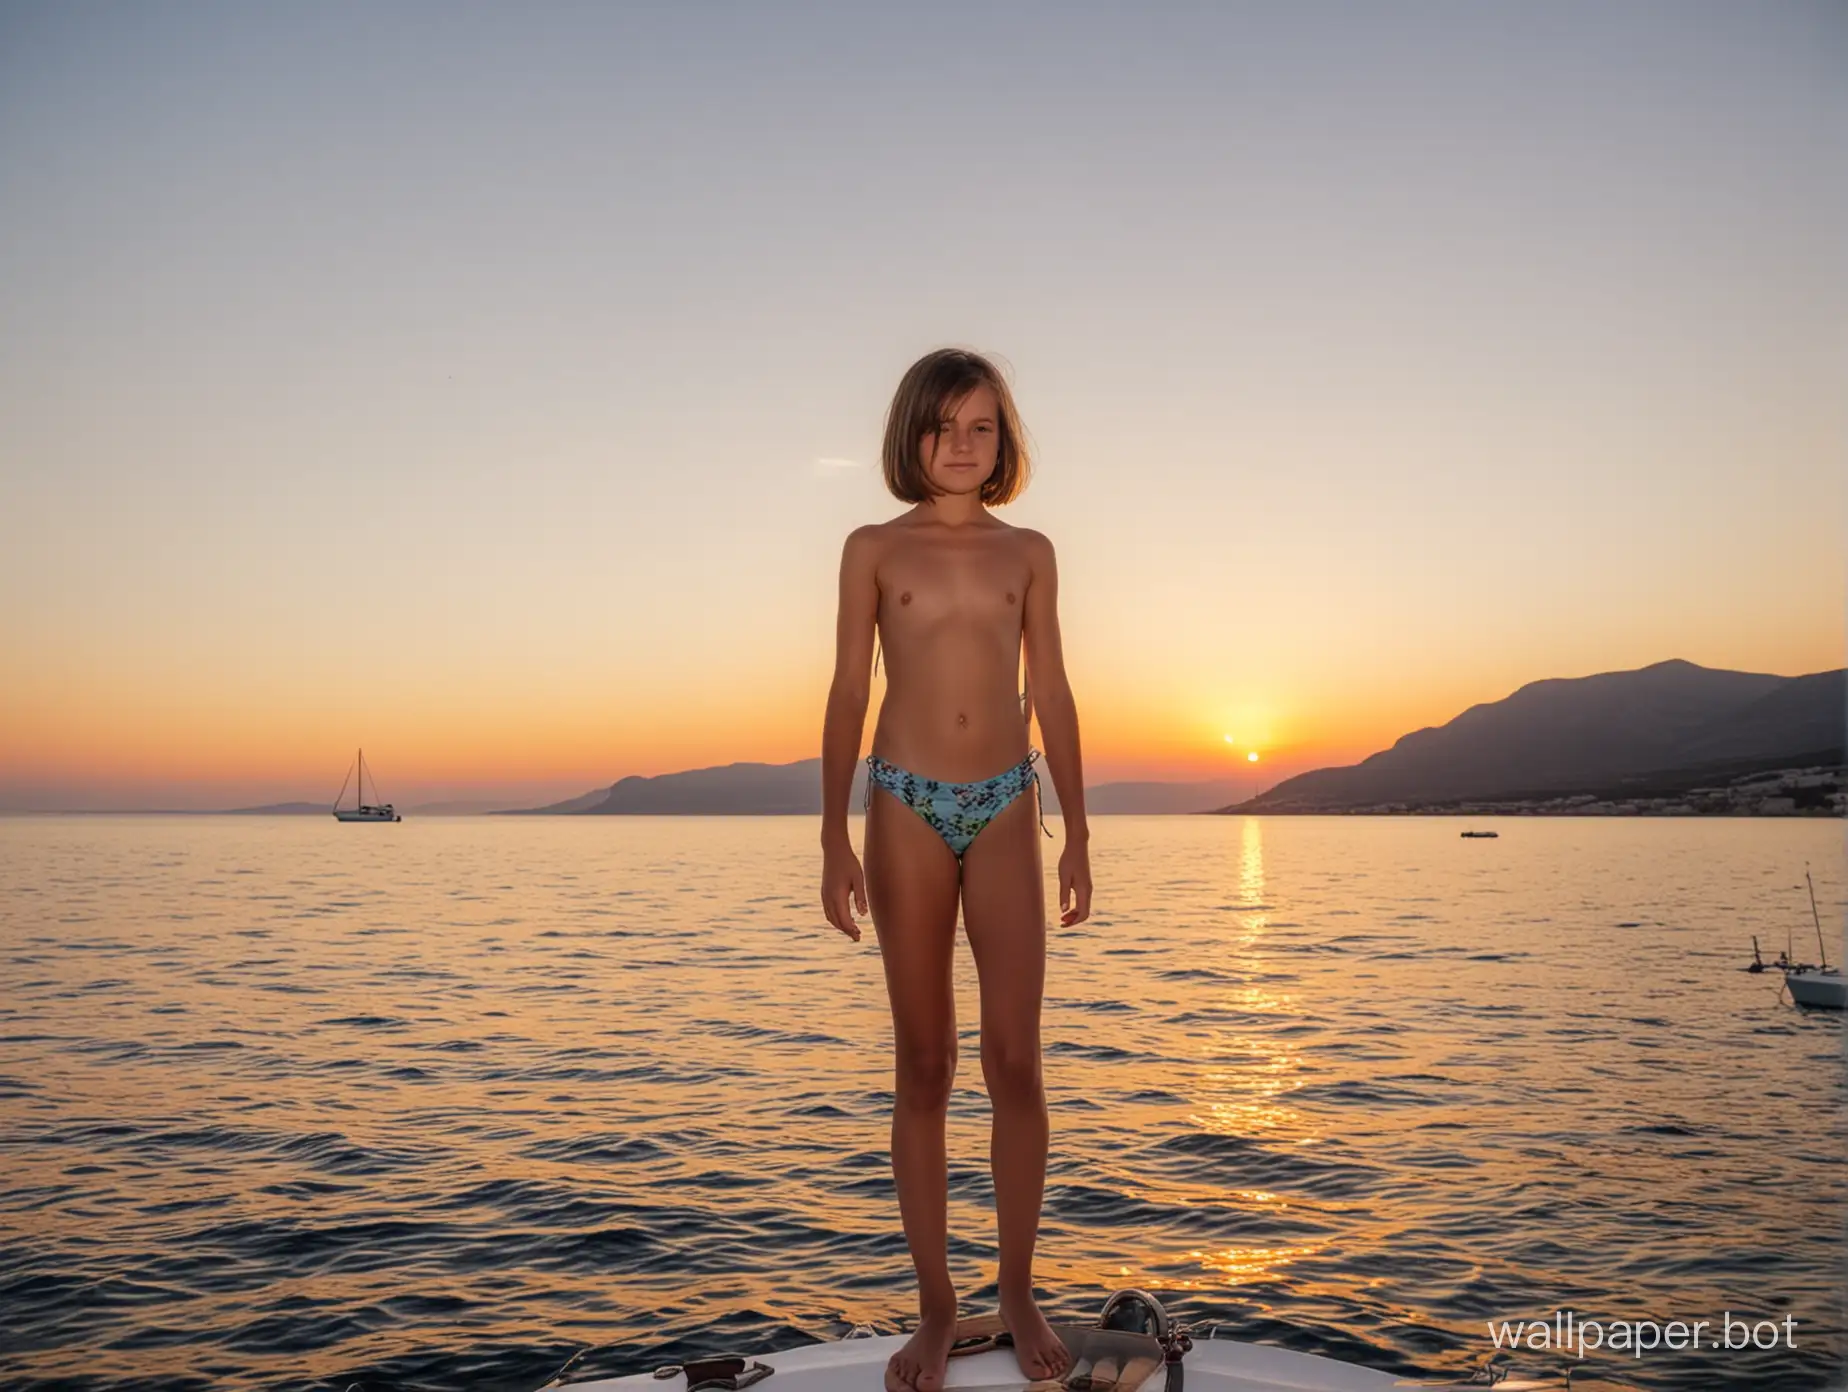 11-year-old girl with a bob, topless, in full height, Crimea, yacht on the horizon, sunset, sea, mountains in the distance